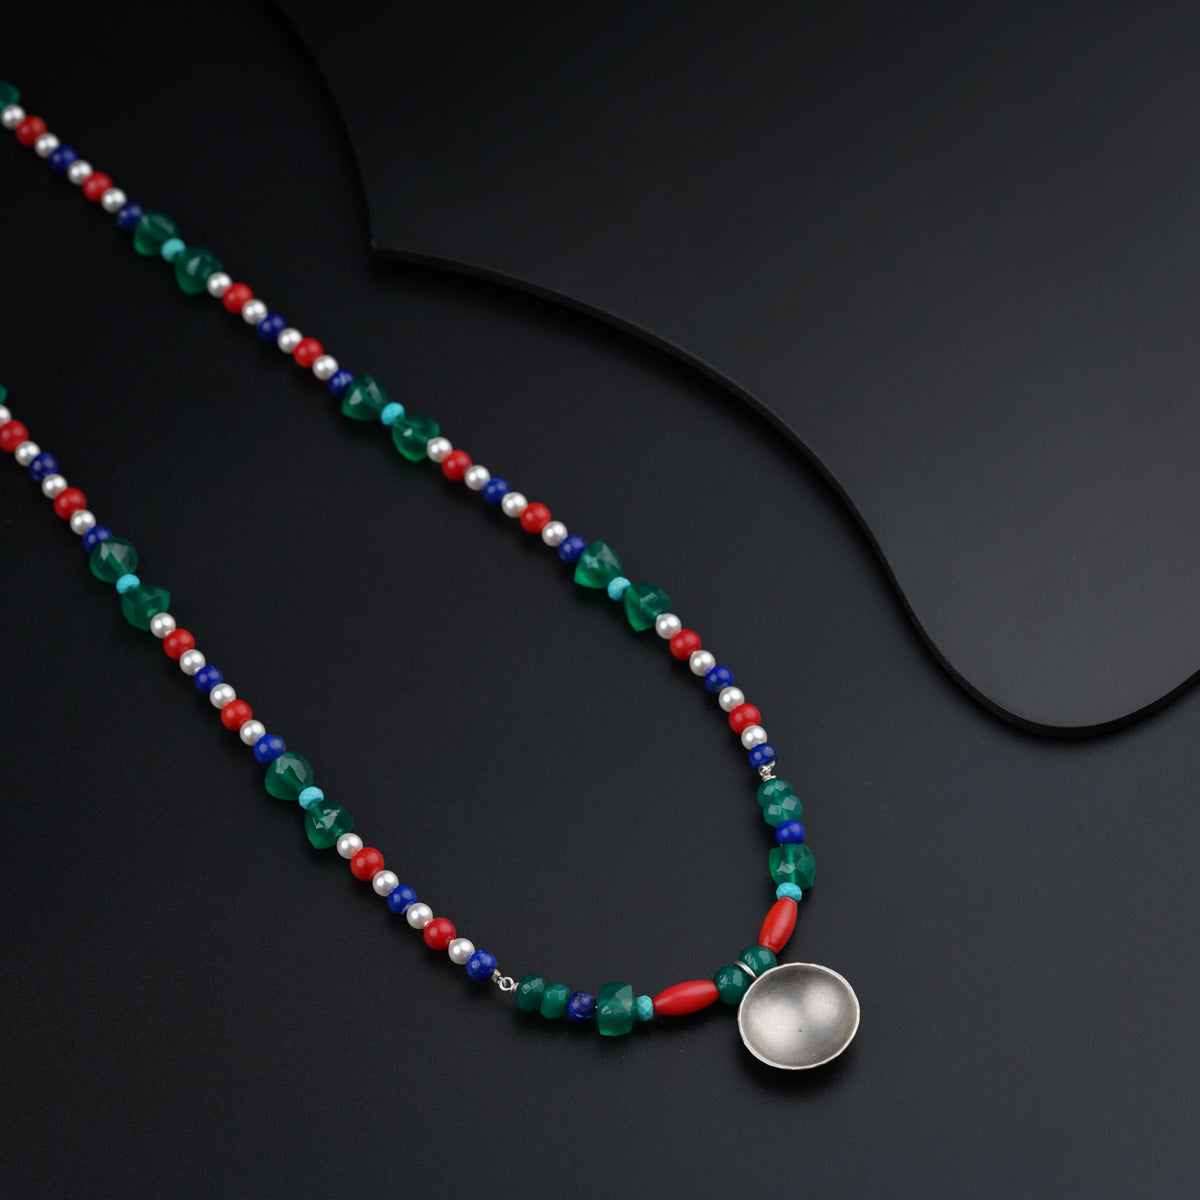 a multicolored beaded necklace with a silver charm